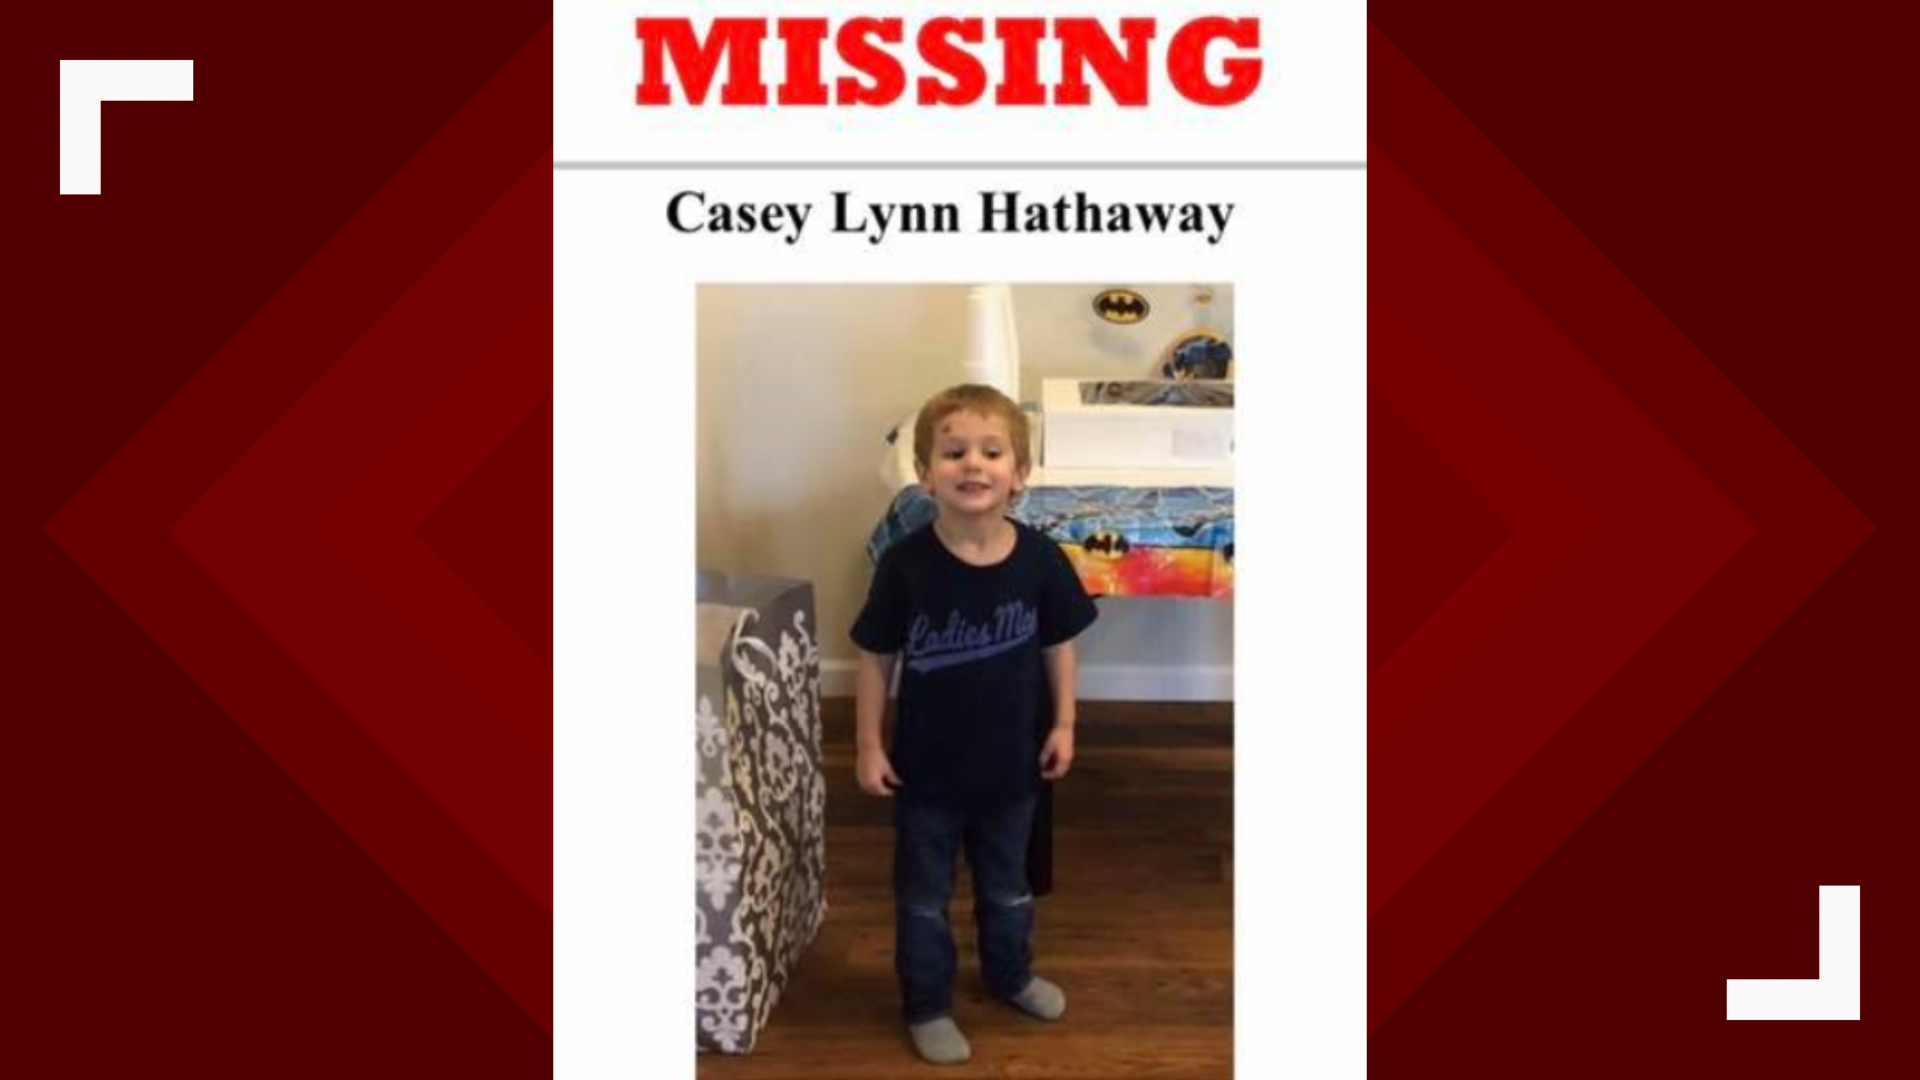 The search for missing 3-year-old Casey Lynn Hathaway continues. The boy hasn't been seen since Tuesday afternoon when he was outside his grandmother's house.